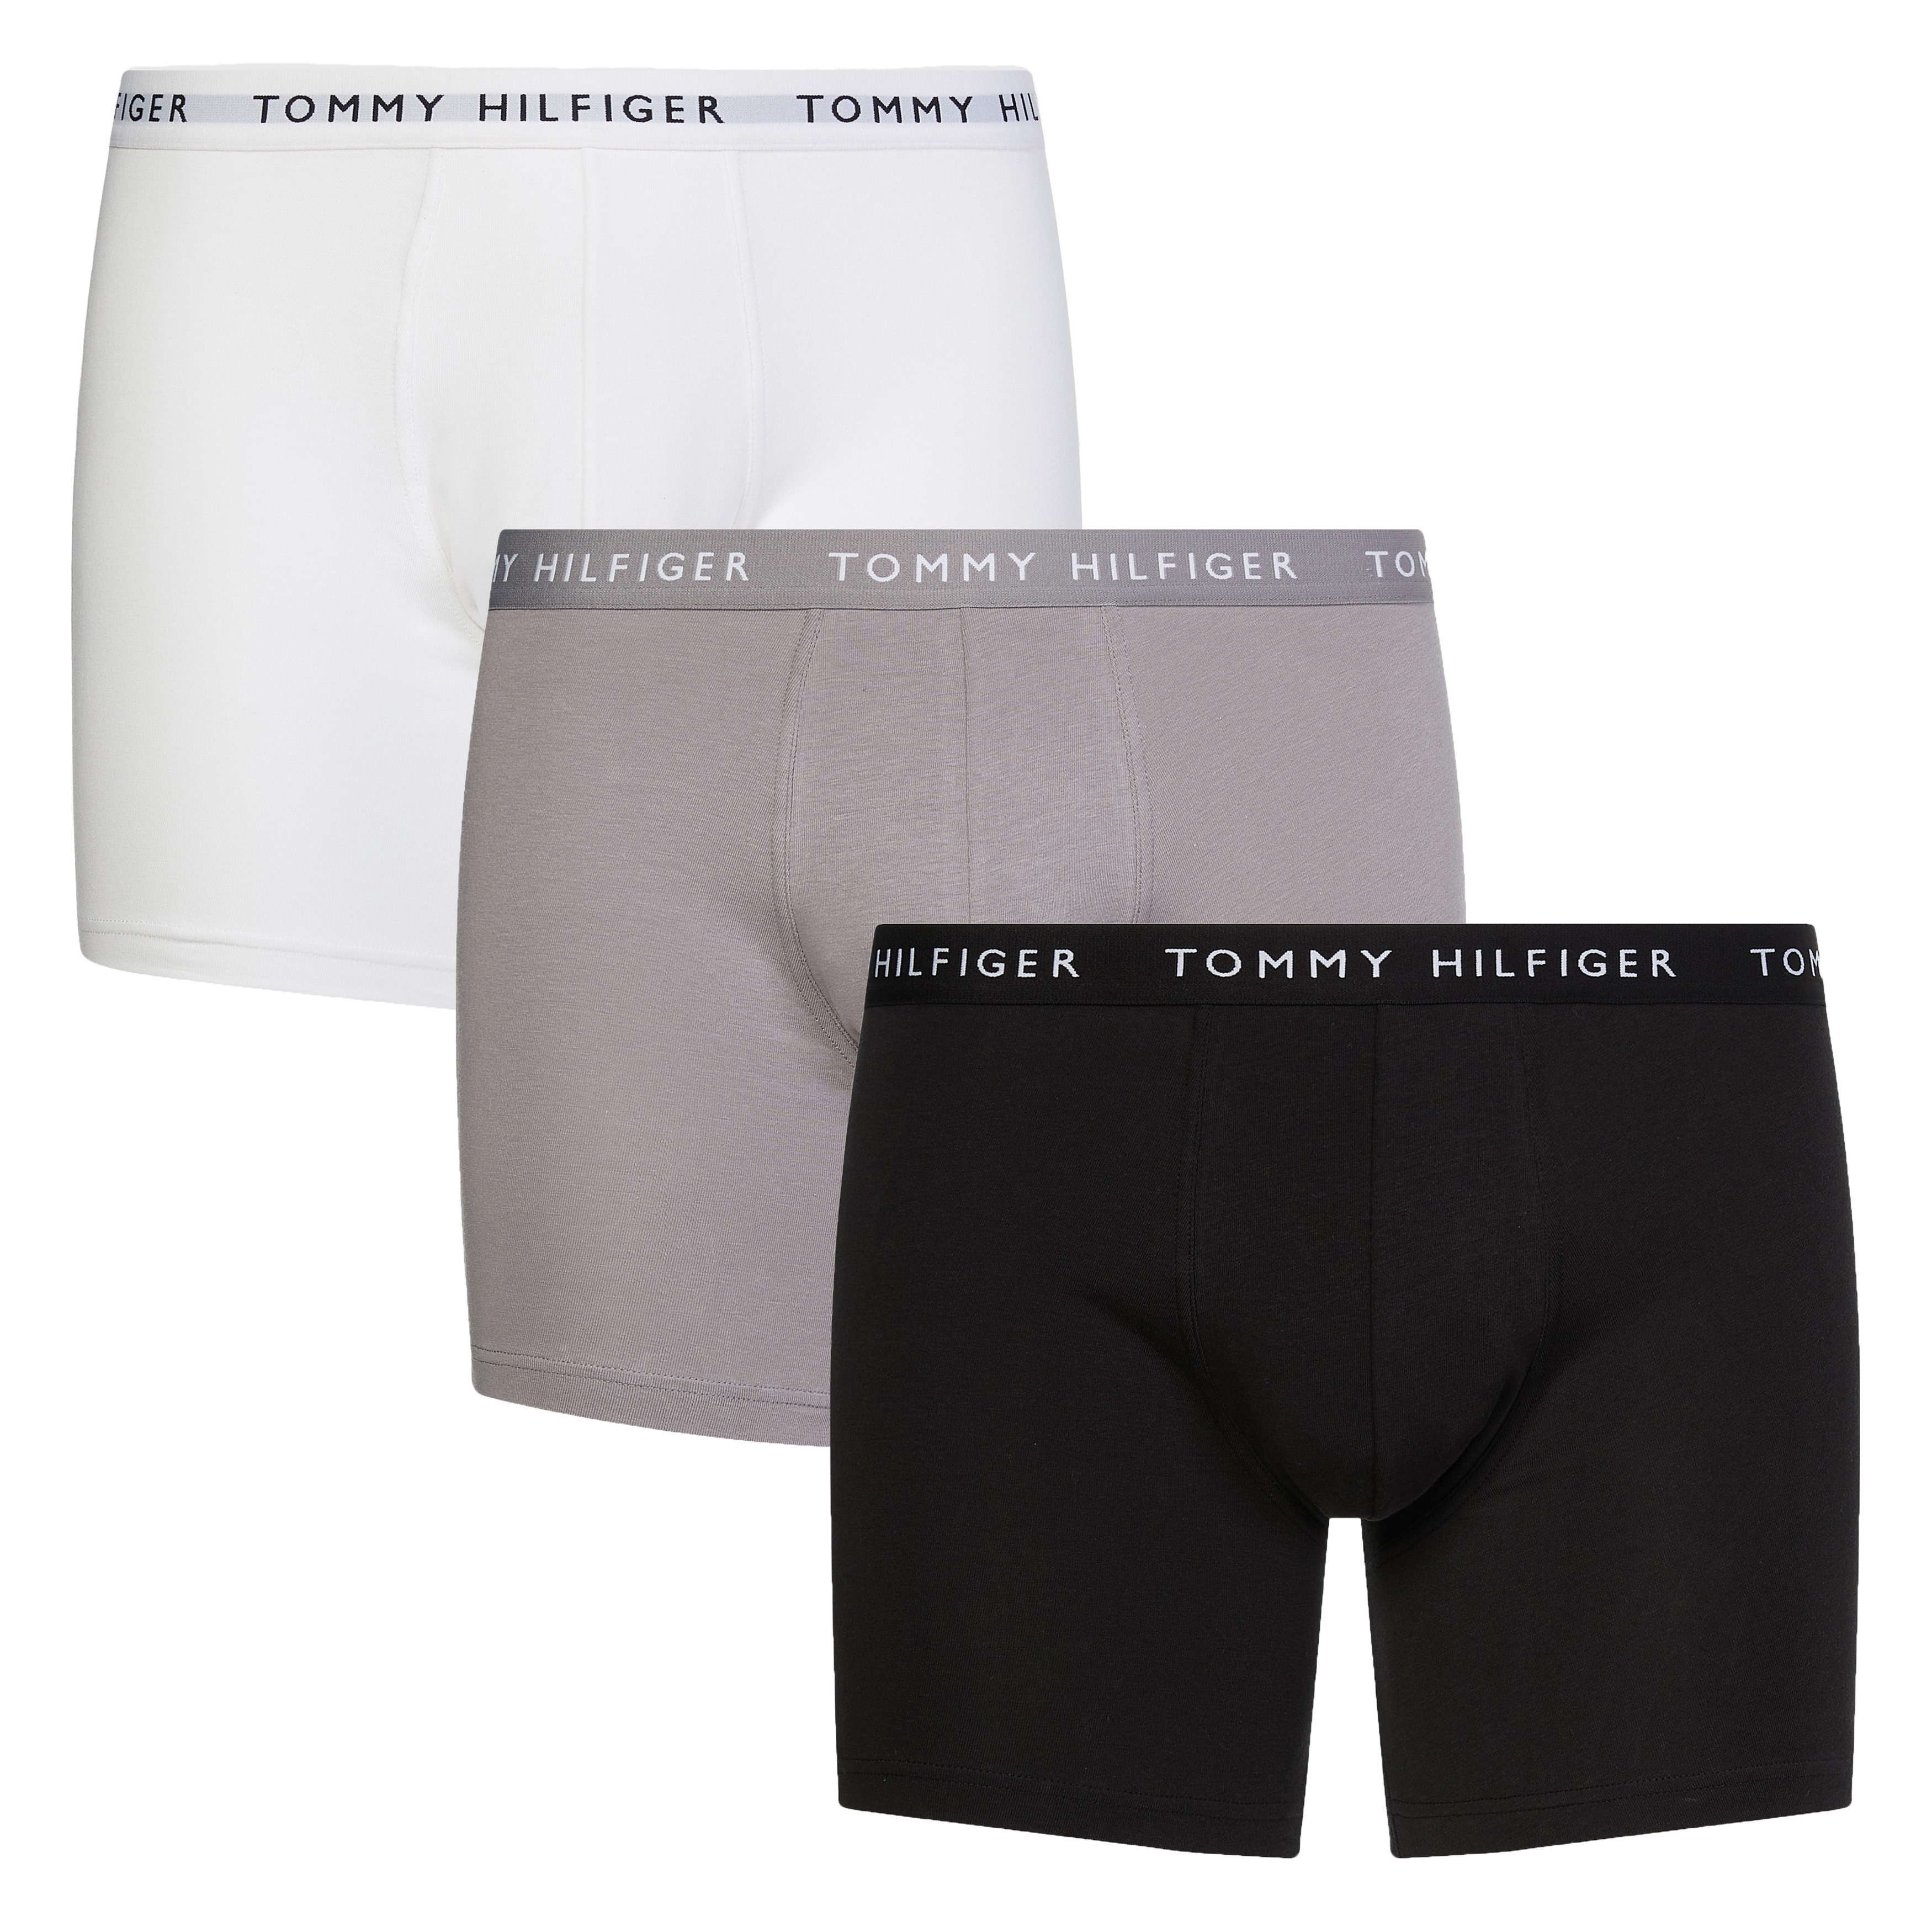 3-Pack Essential Boxer Briefs Tommy - black, grey and white: Packs